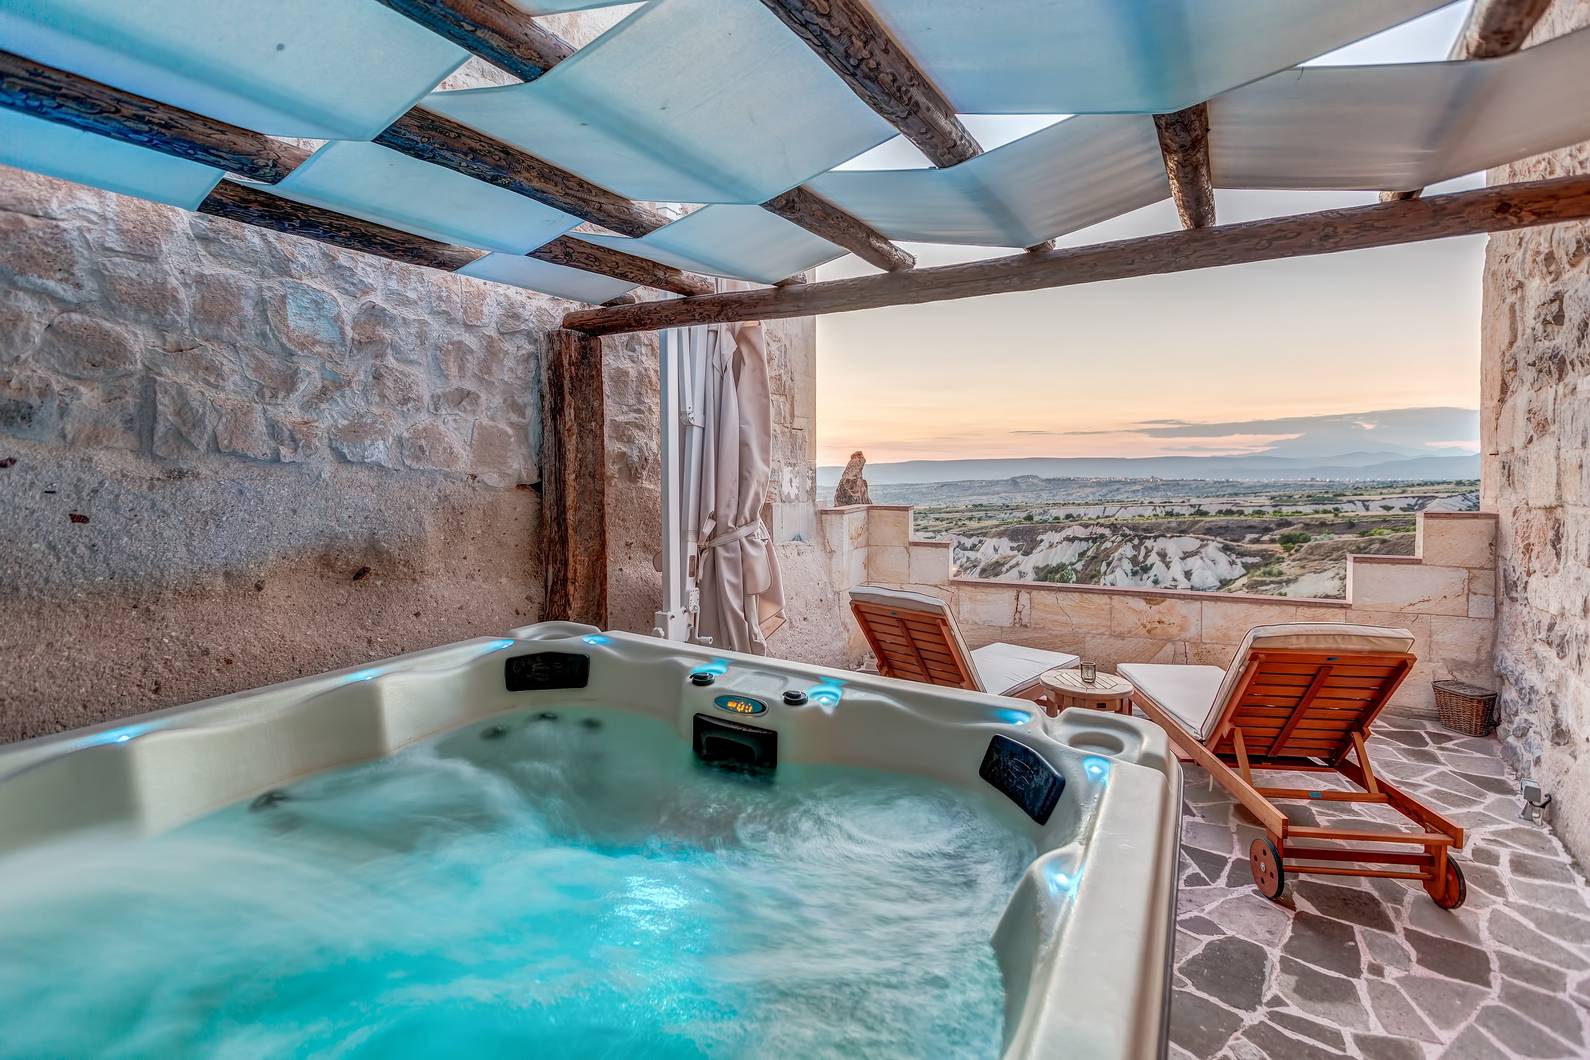 503 – royal suite with outdoor jacuzzi and fireplace